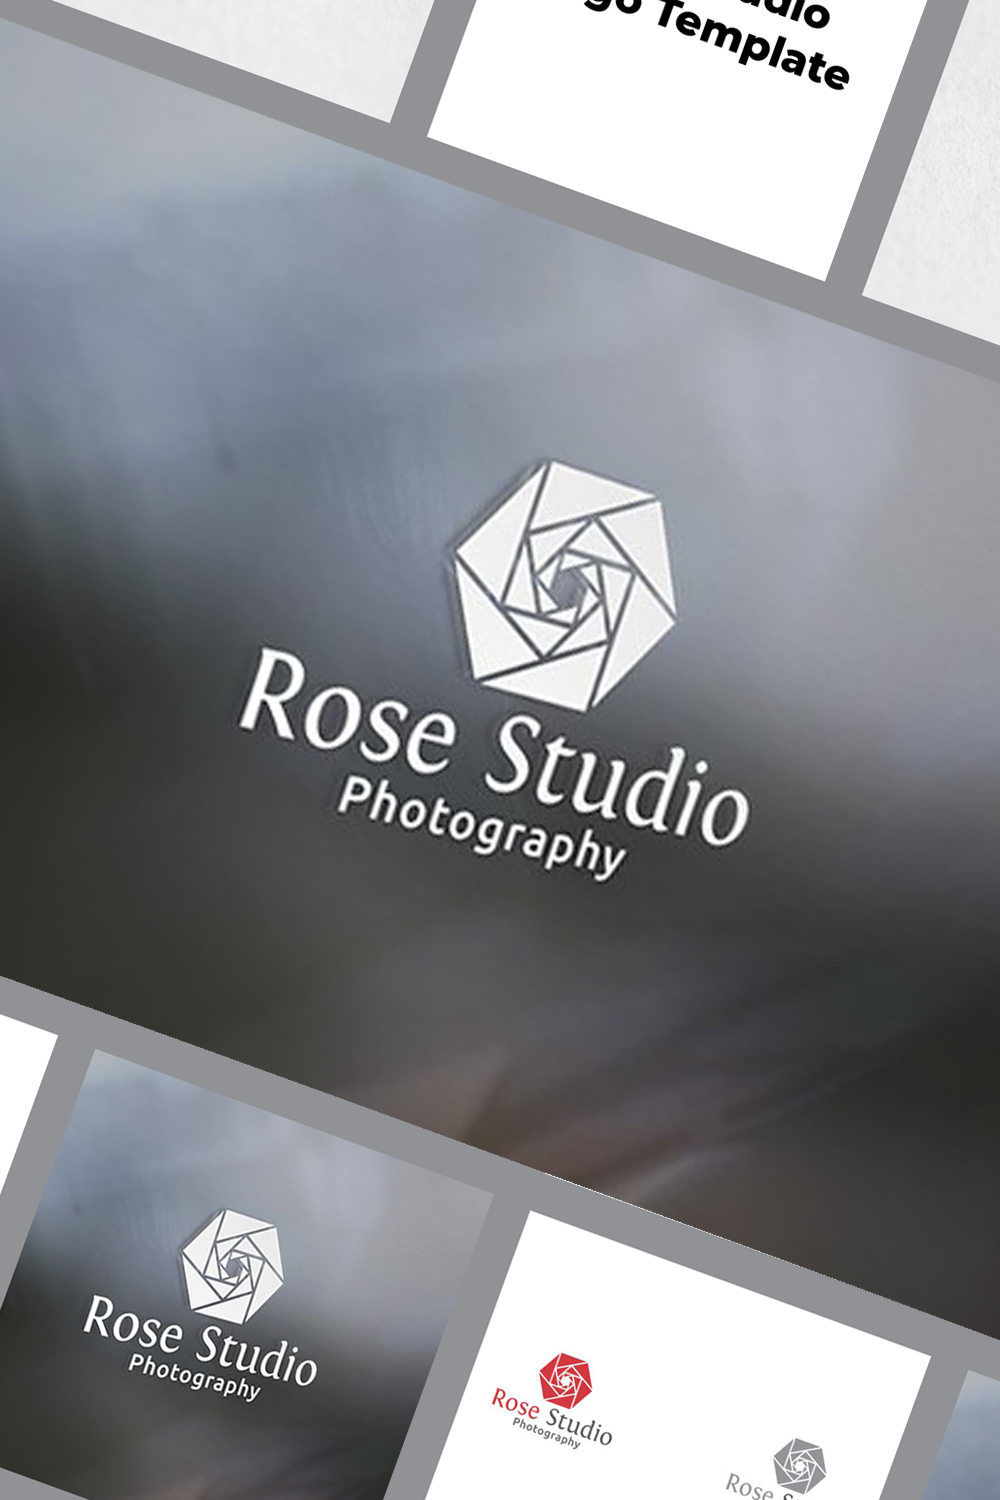 Unique logo style with roses.